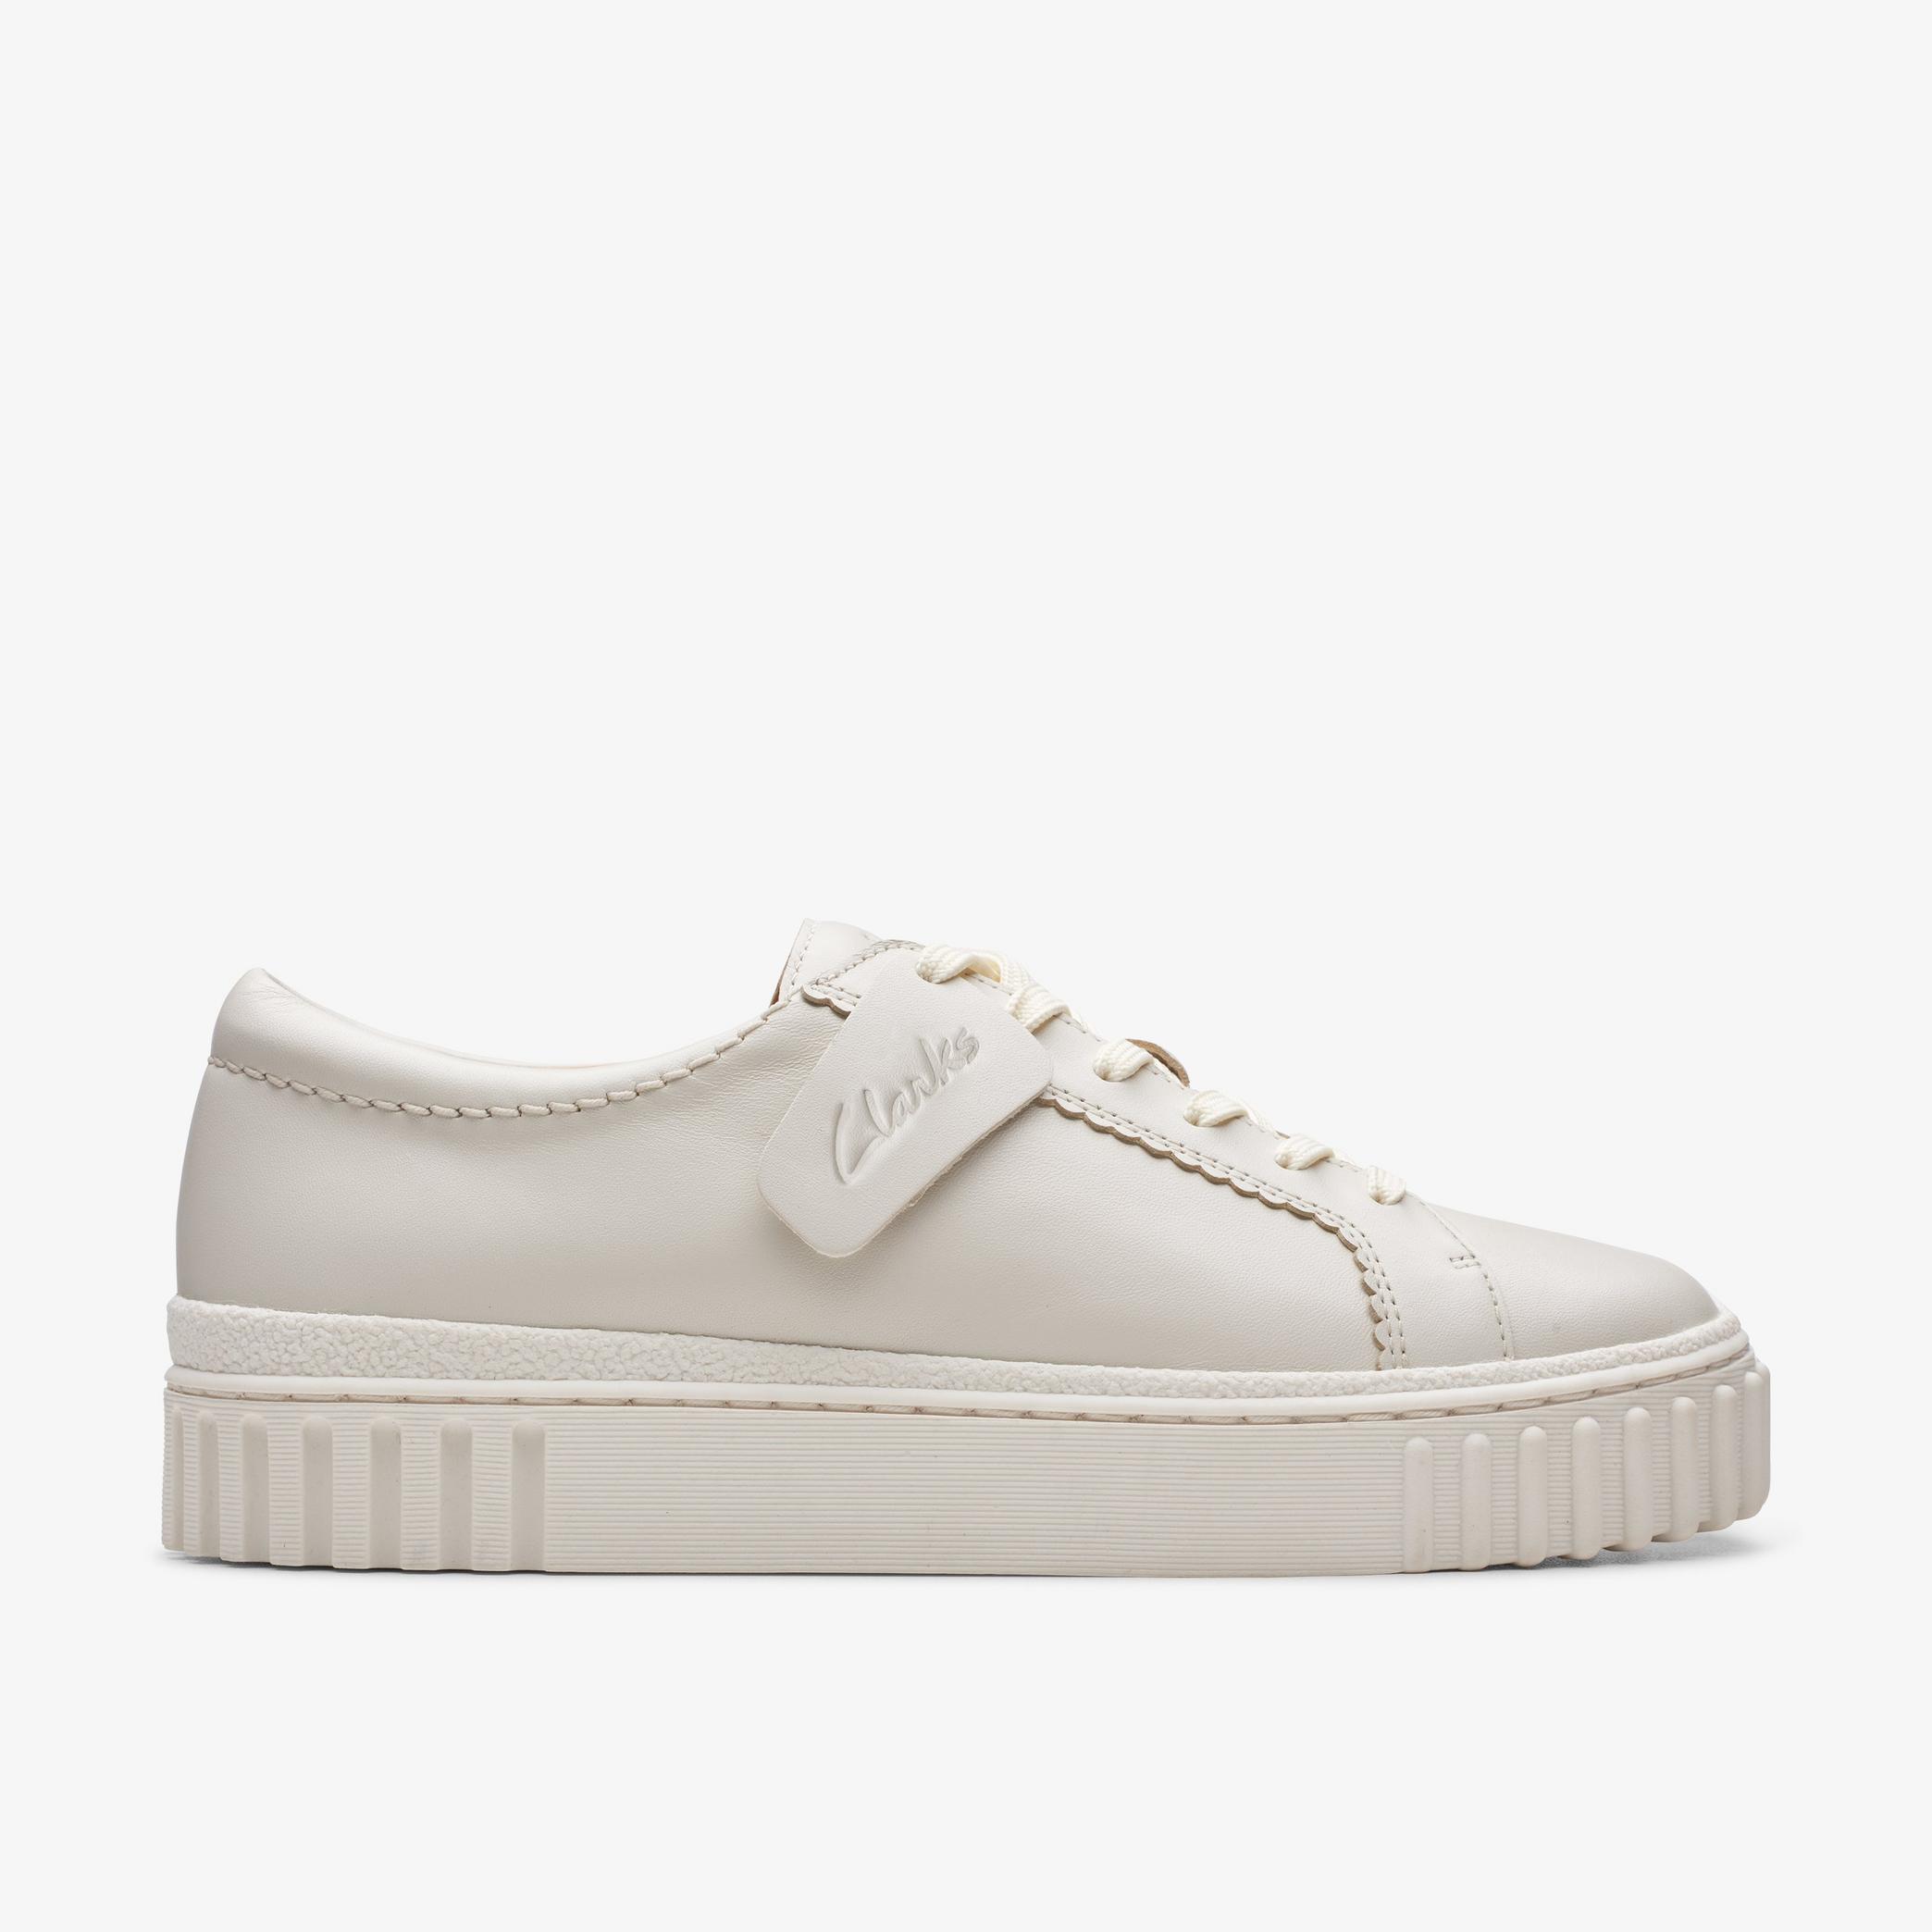 Mayhill Walk Off White Leather Sneakers, view 1 of 6